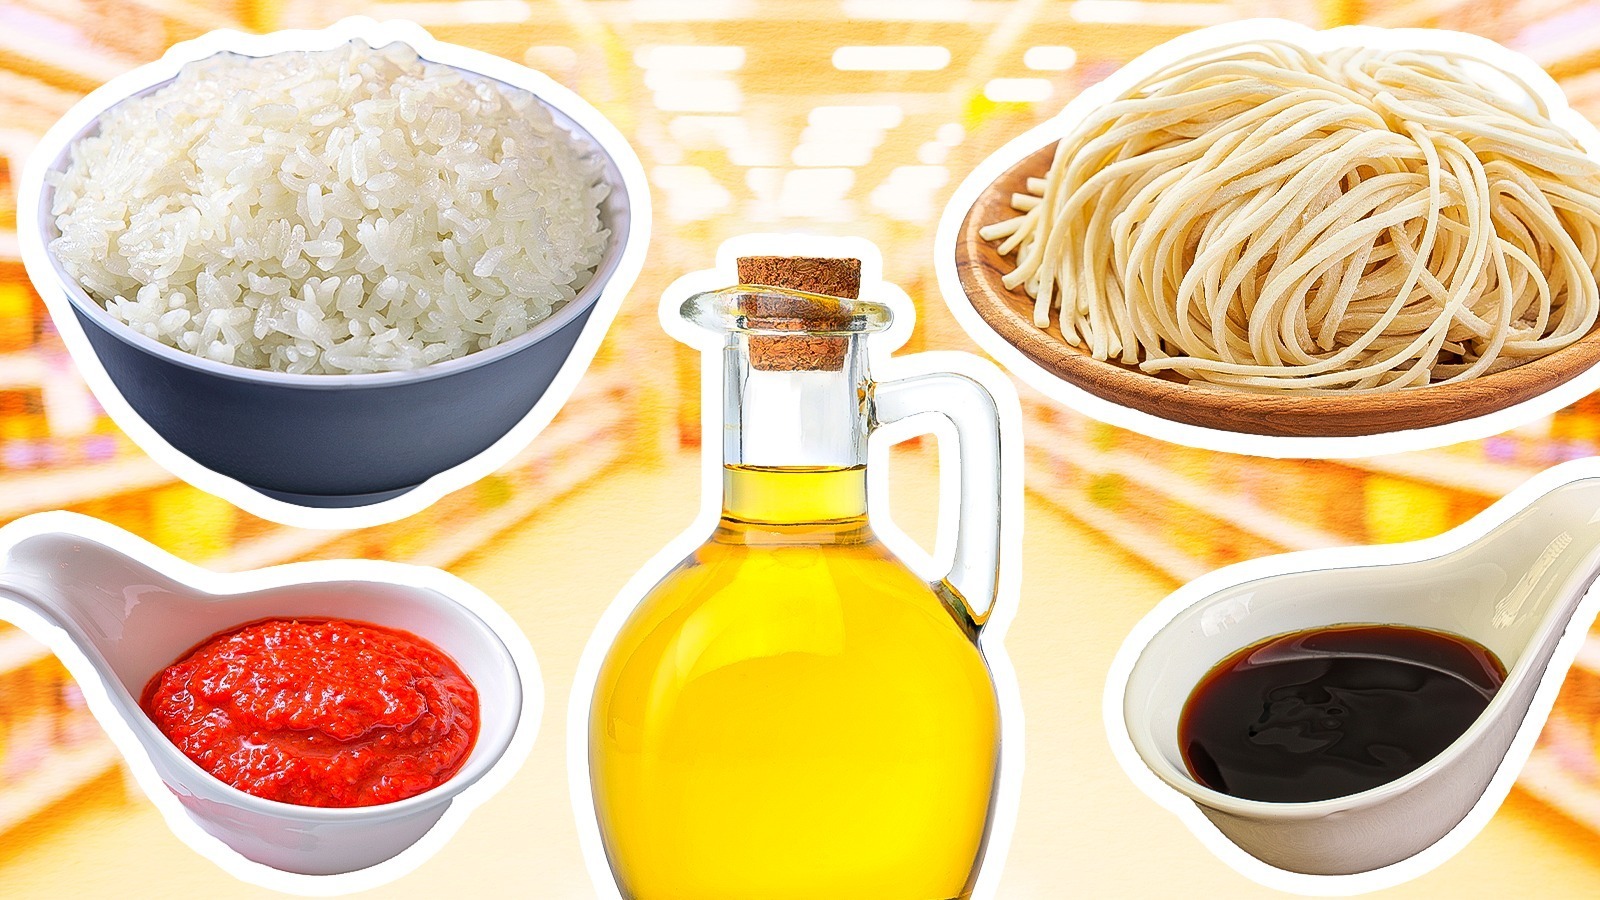 Our Glossary of Asian Ingredients & Terms